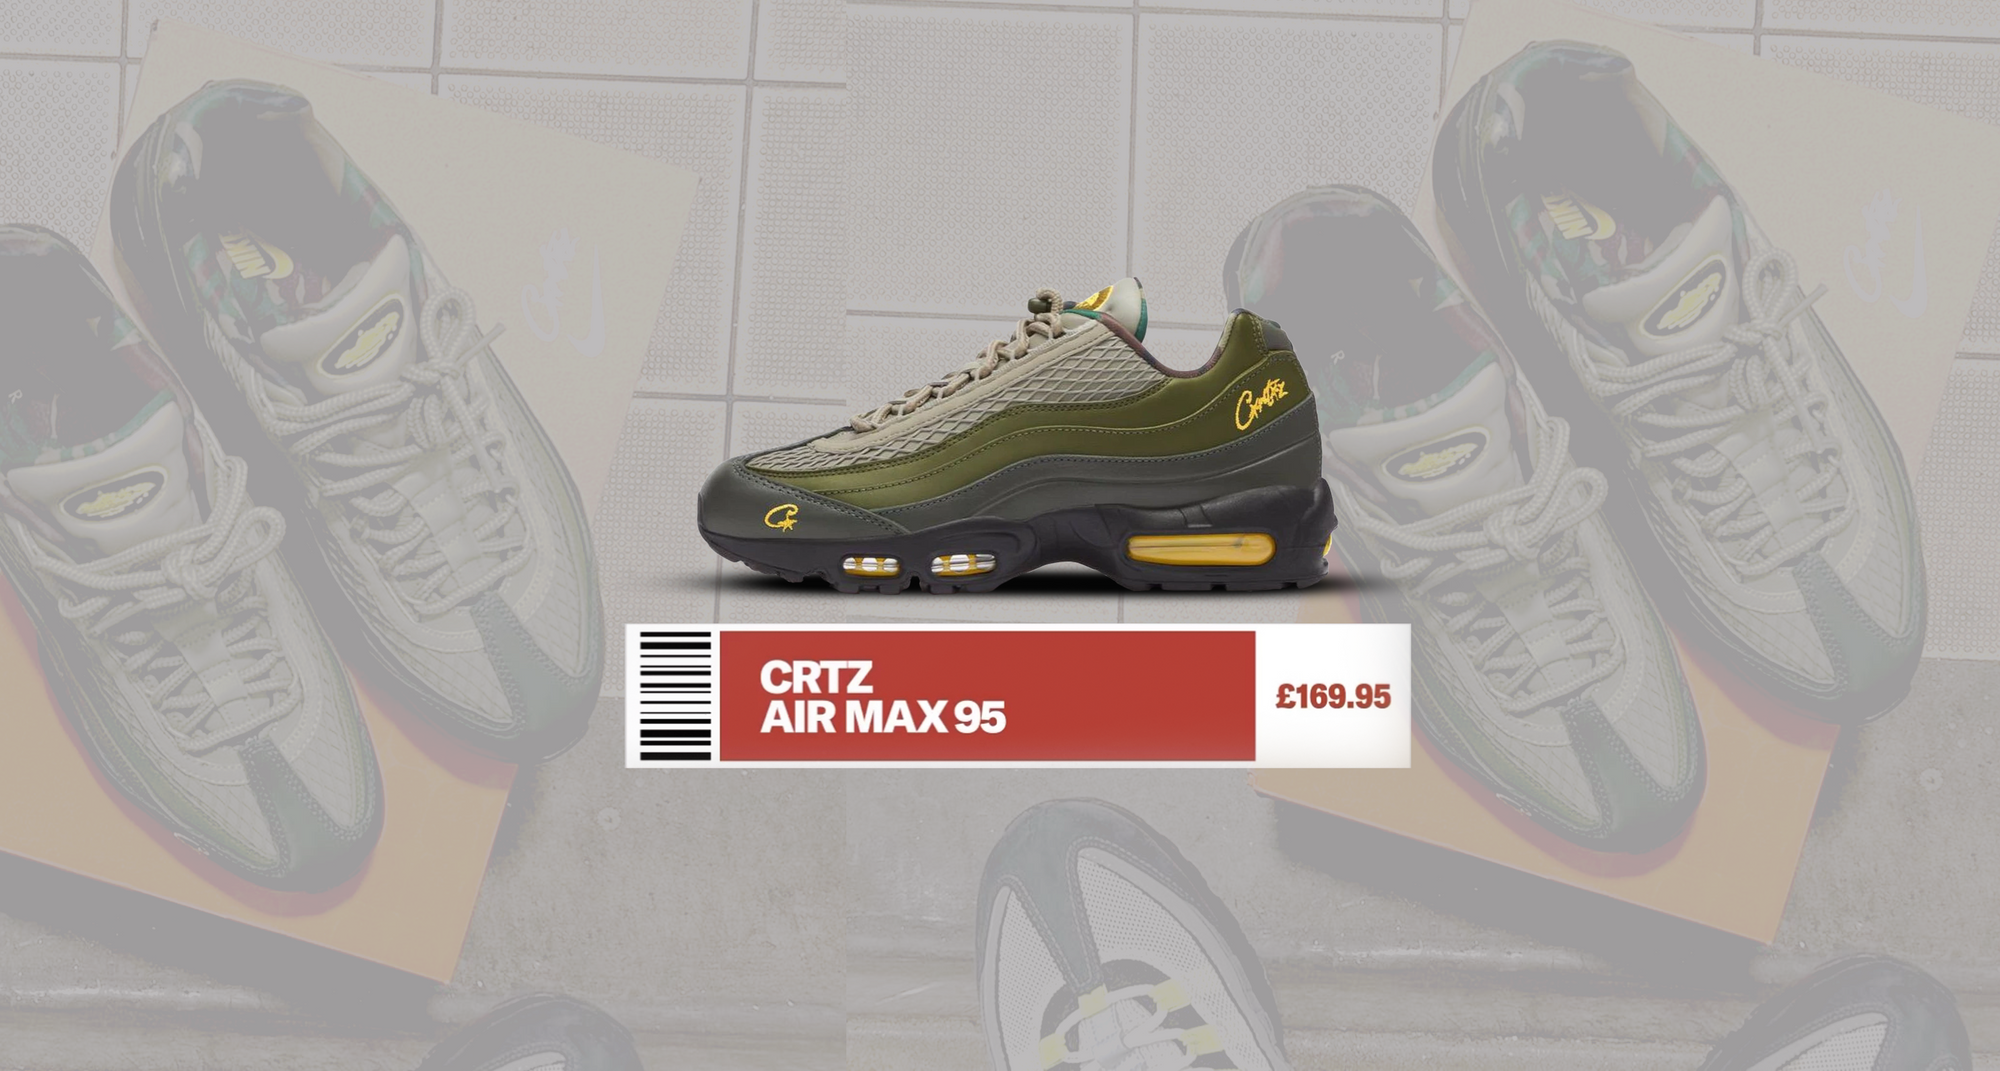 A Corteiz Air Max 95 is Coming